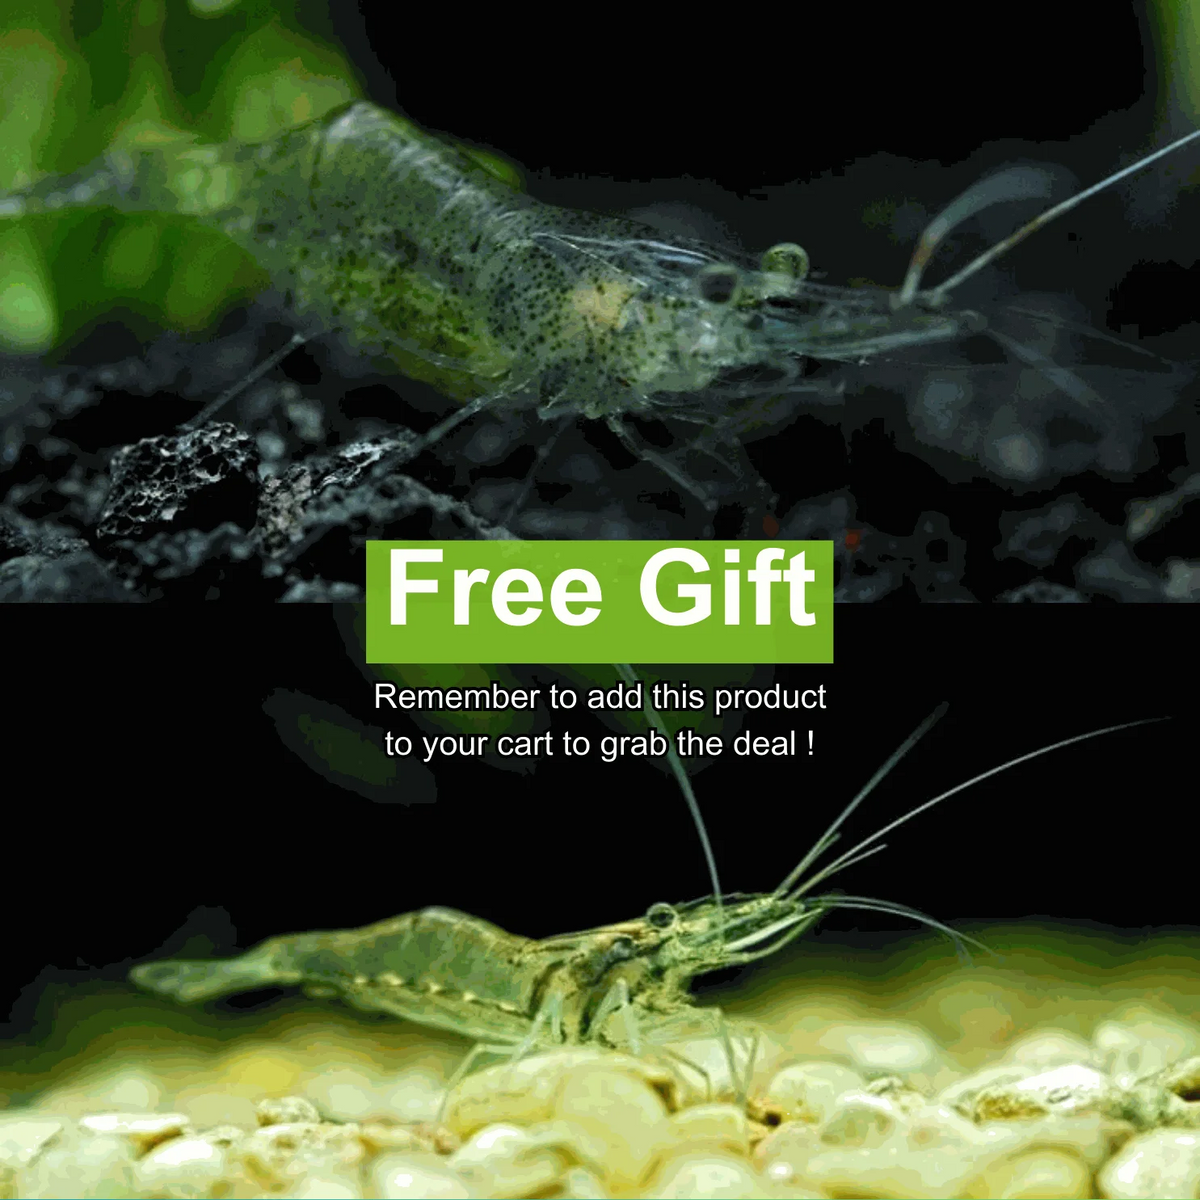 Free Gift For Order From 20 - Ghost Shrimp - Use code: GIFT120 (20 code available only)